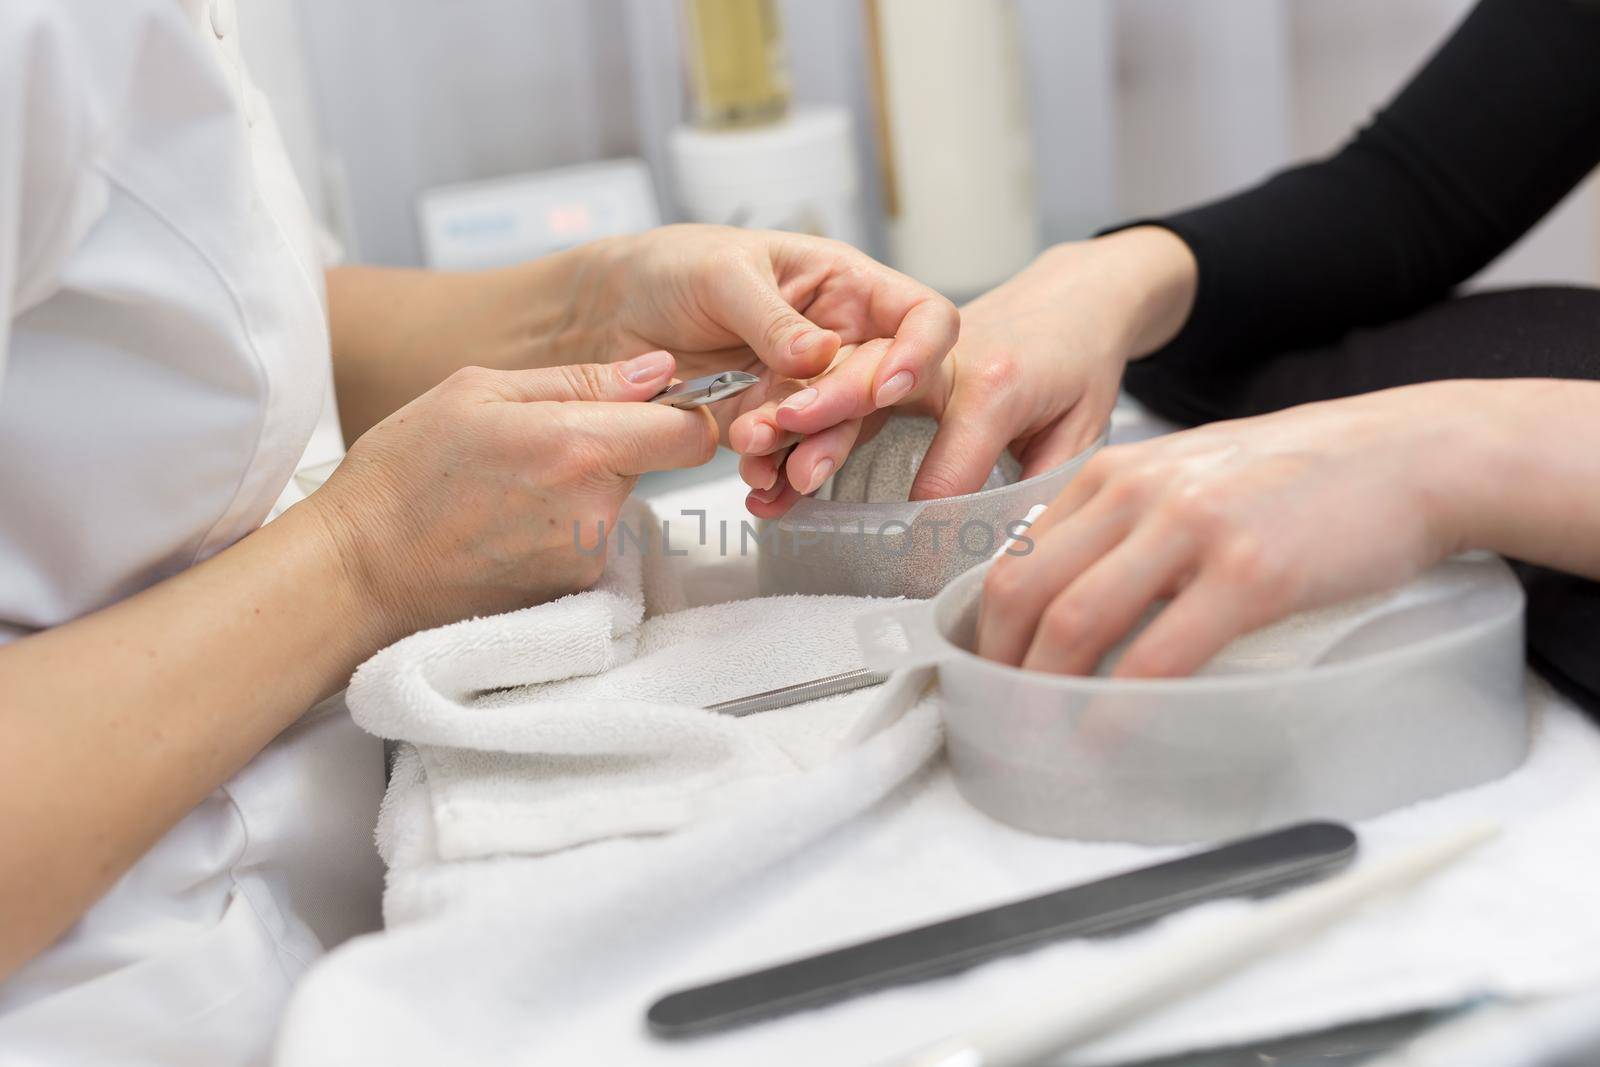 Nail Salon. Closeup Of Female Hand With Healthy Natural Nails Getting Nail Care Procedure. Hands Removing Cuticles With Professional Nail Tool, Metal Clippers. Beauty Manicure